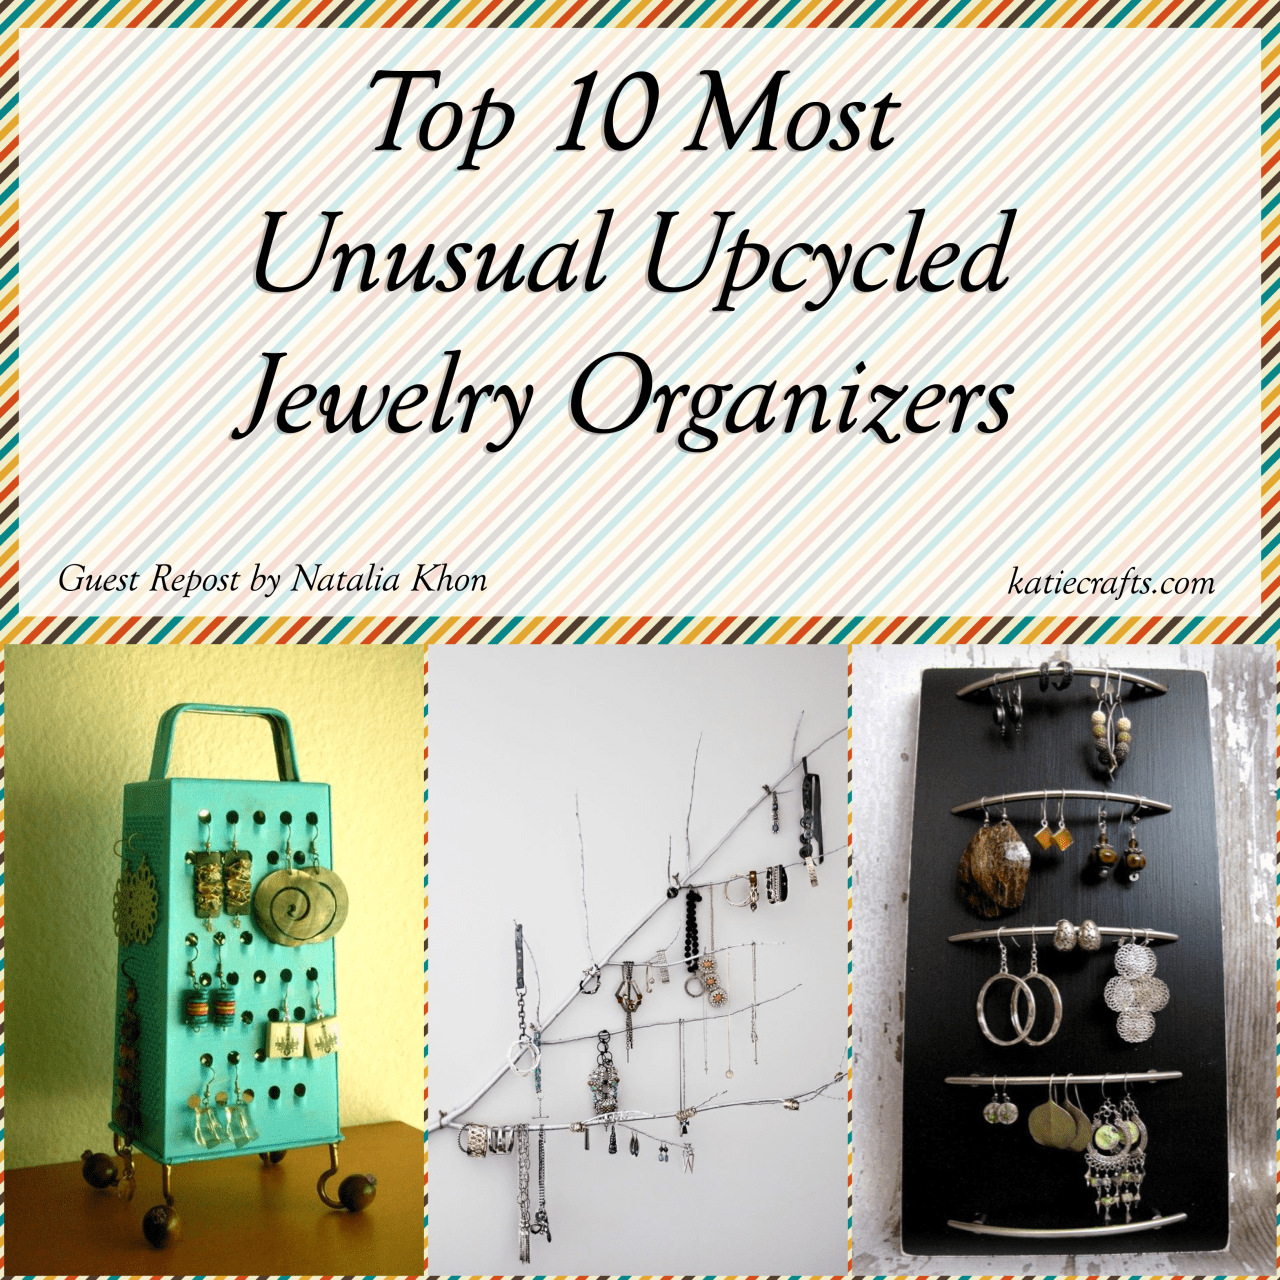 Top 10 Unusual Upcycled Jewelry Organizers on Katie Crafts; https://www.katiecrafts.com